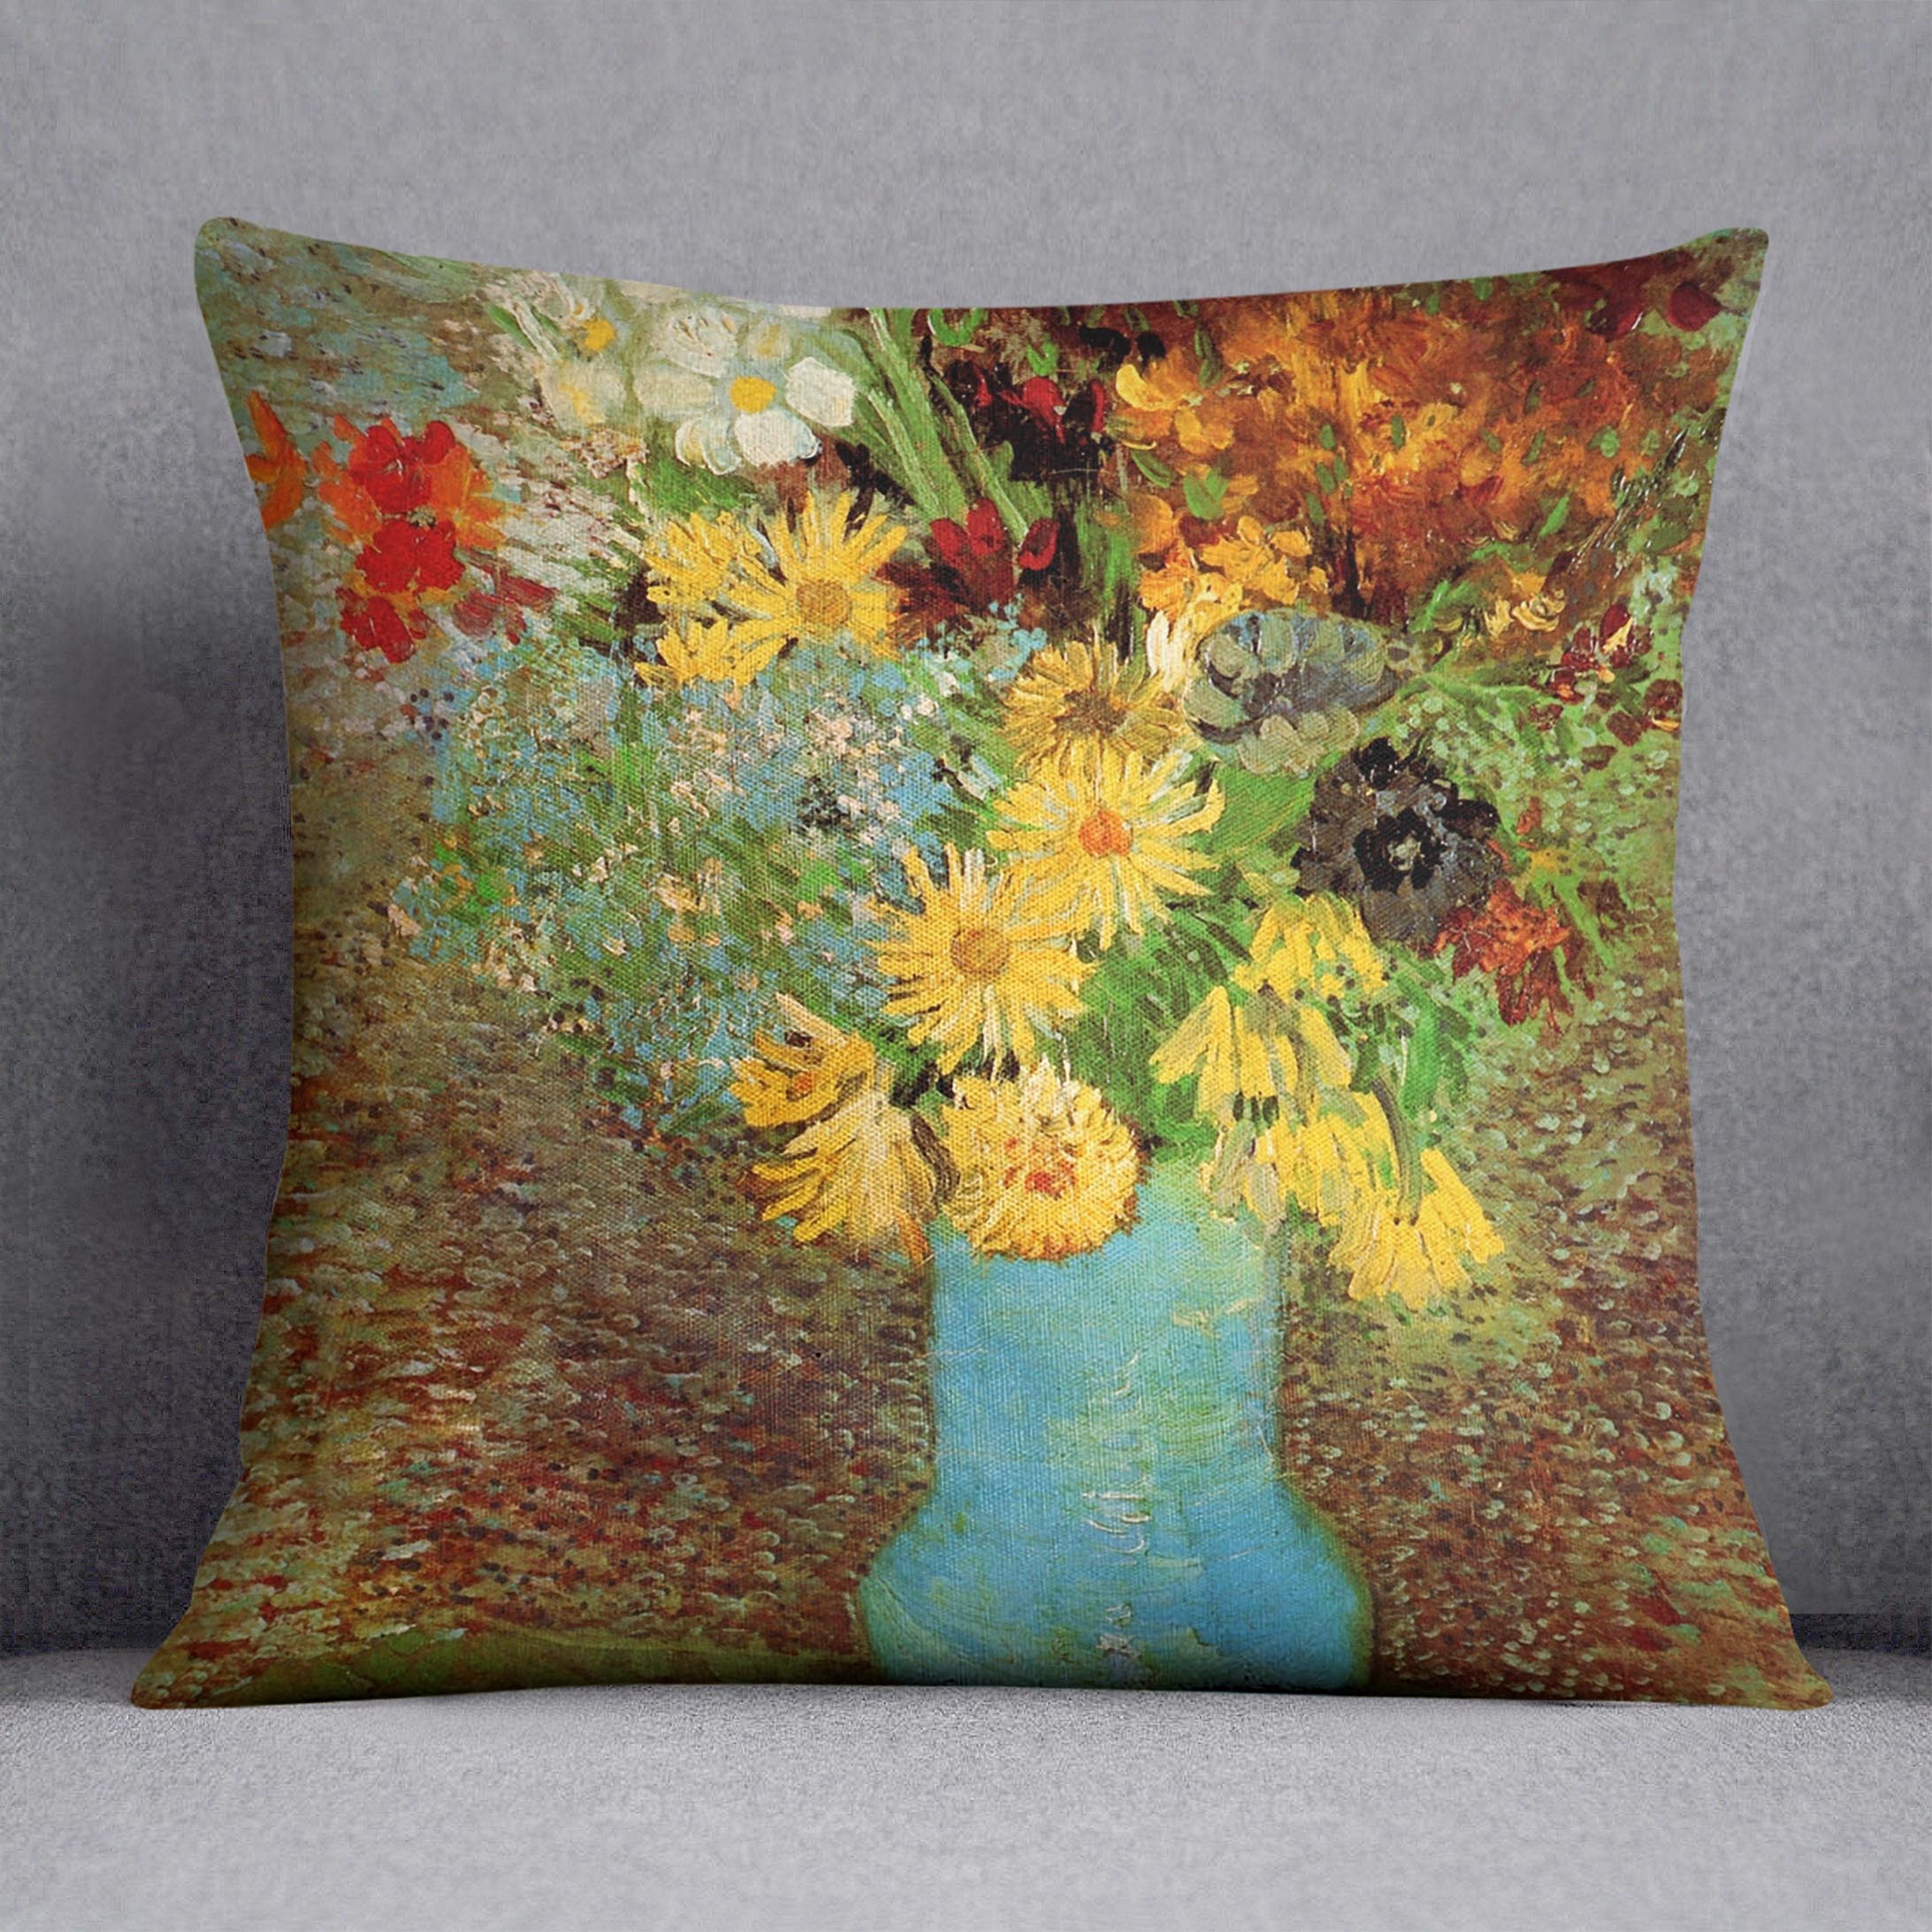 Vase with Daisies and Anemones by Van Gogh Cushion